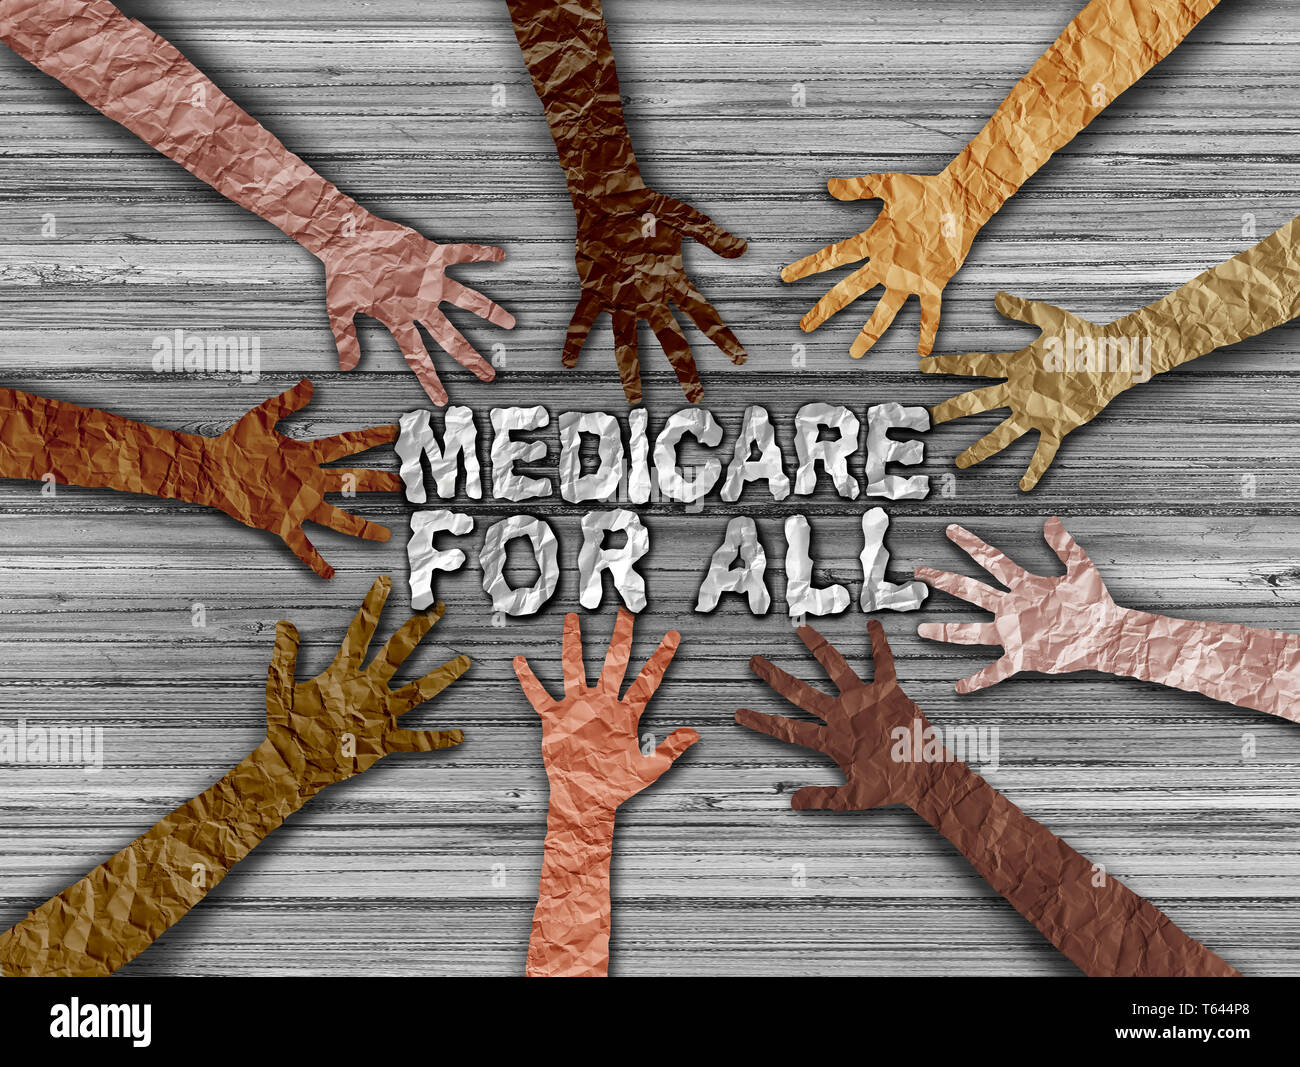 Medicare insurance for all national health government social policy concept as a political issues in a 3D illustration style Stock Photo